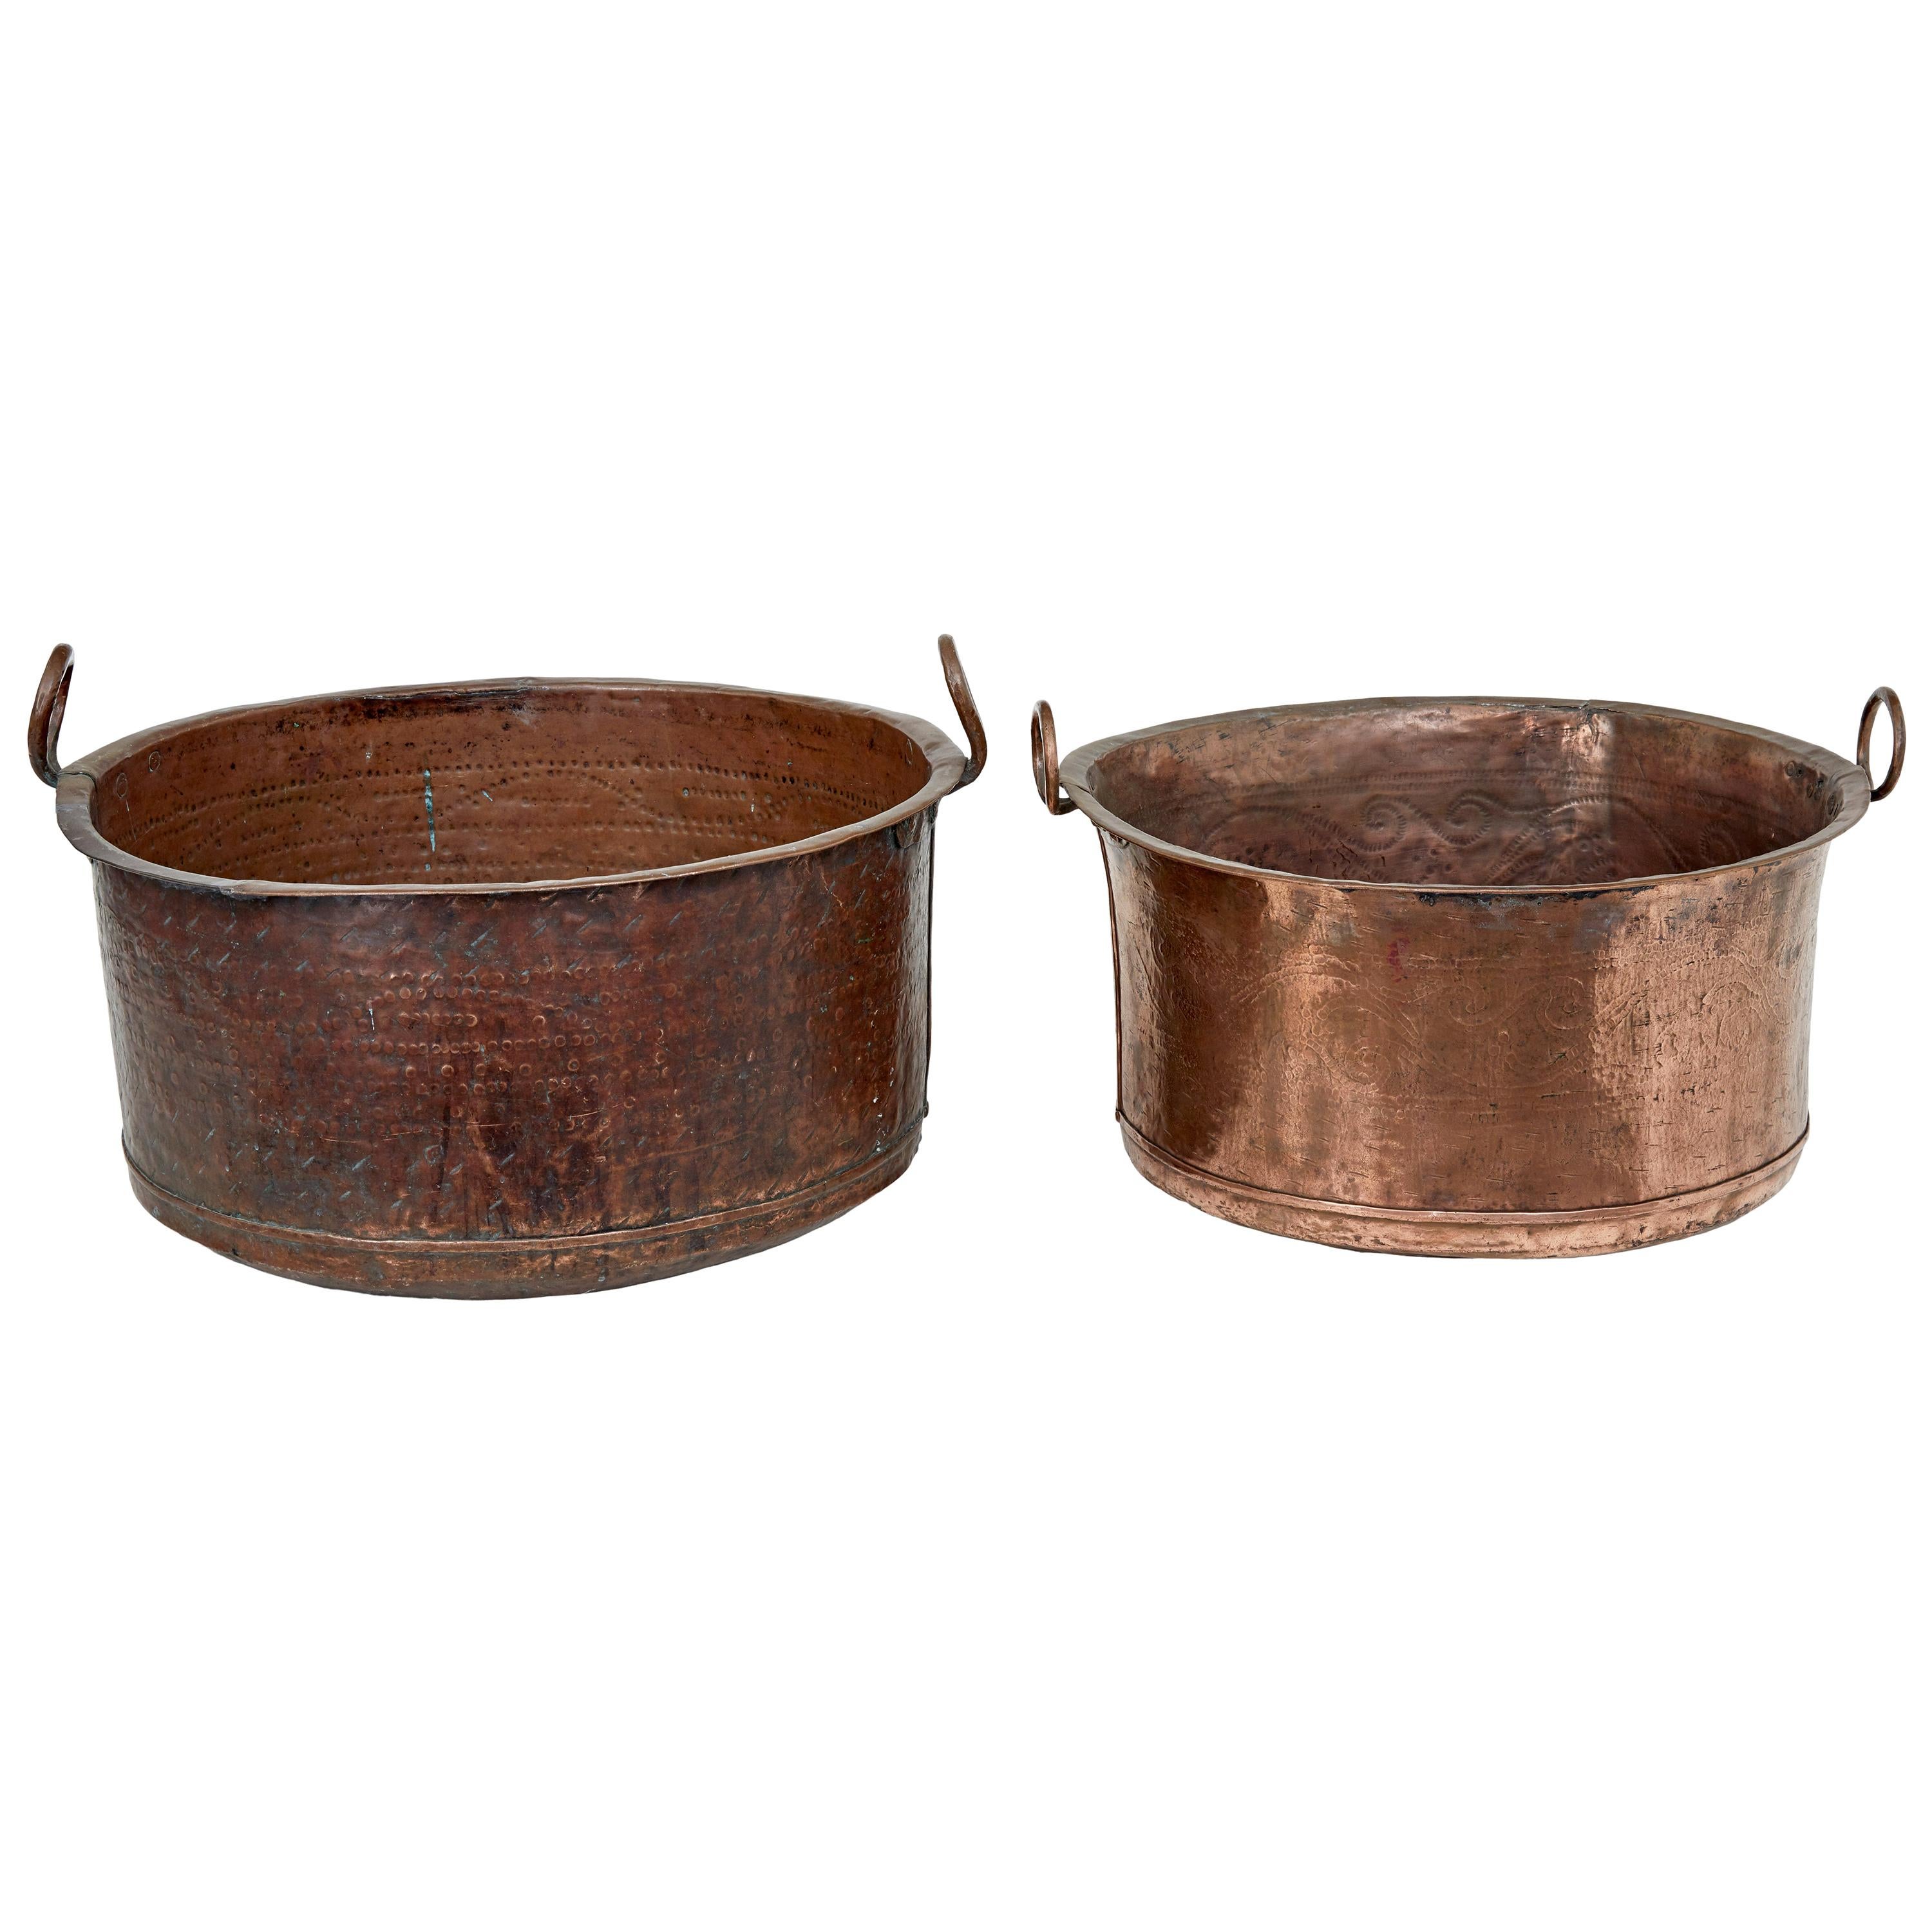 2 Victorian Large Copper Cooking Vessels